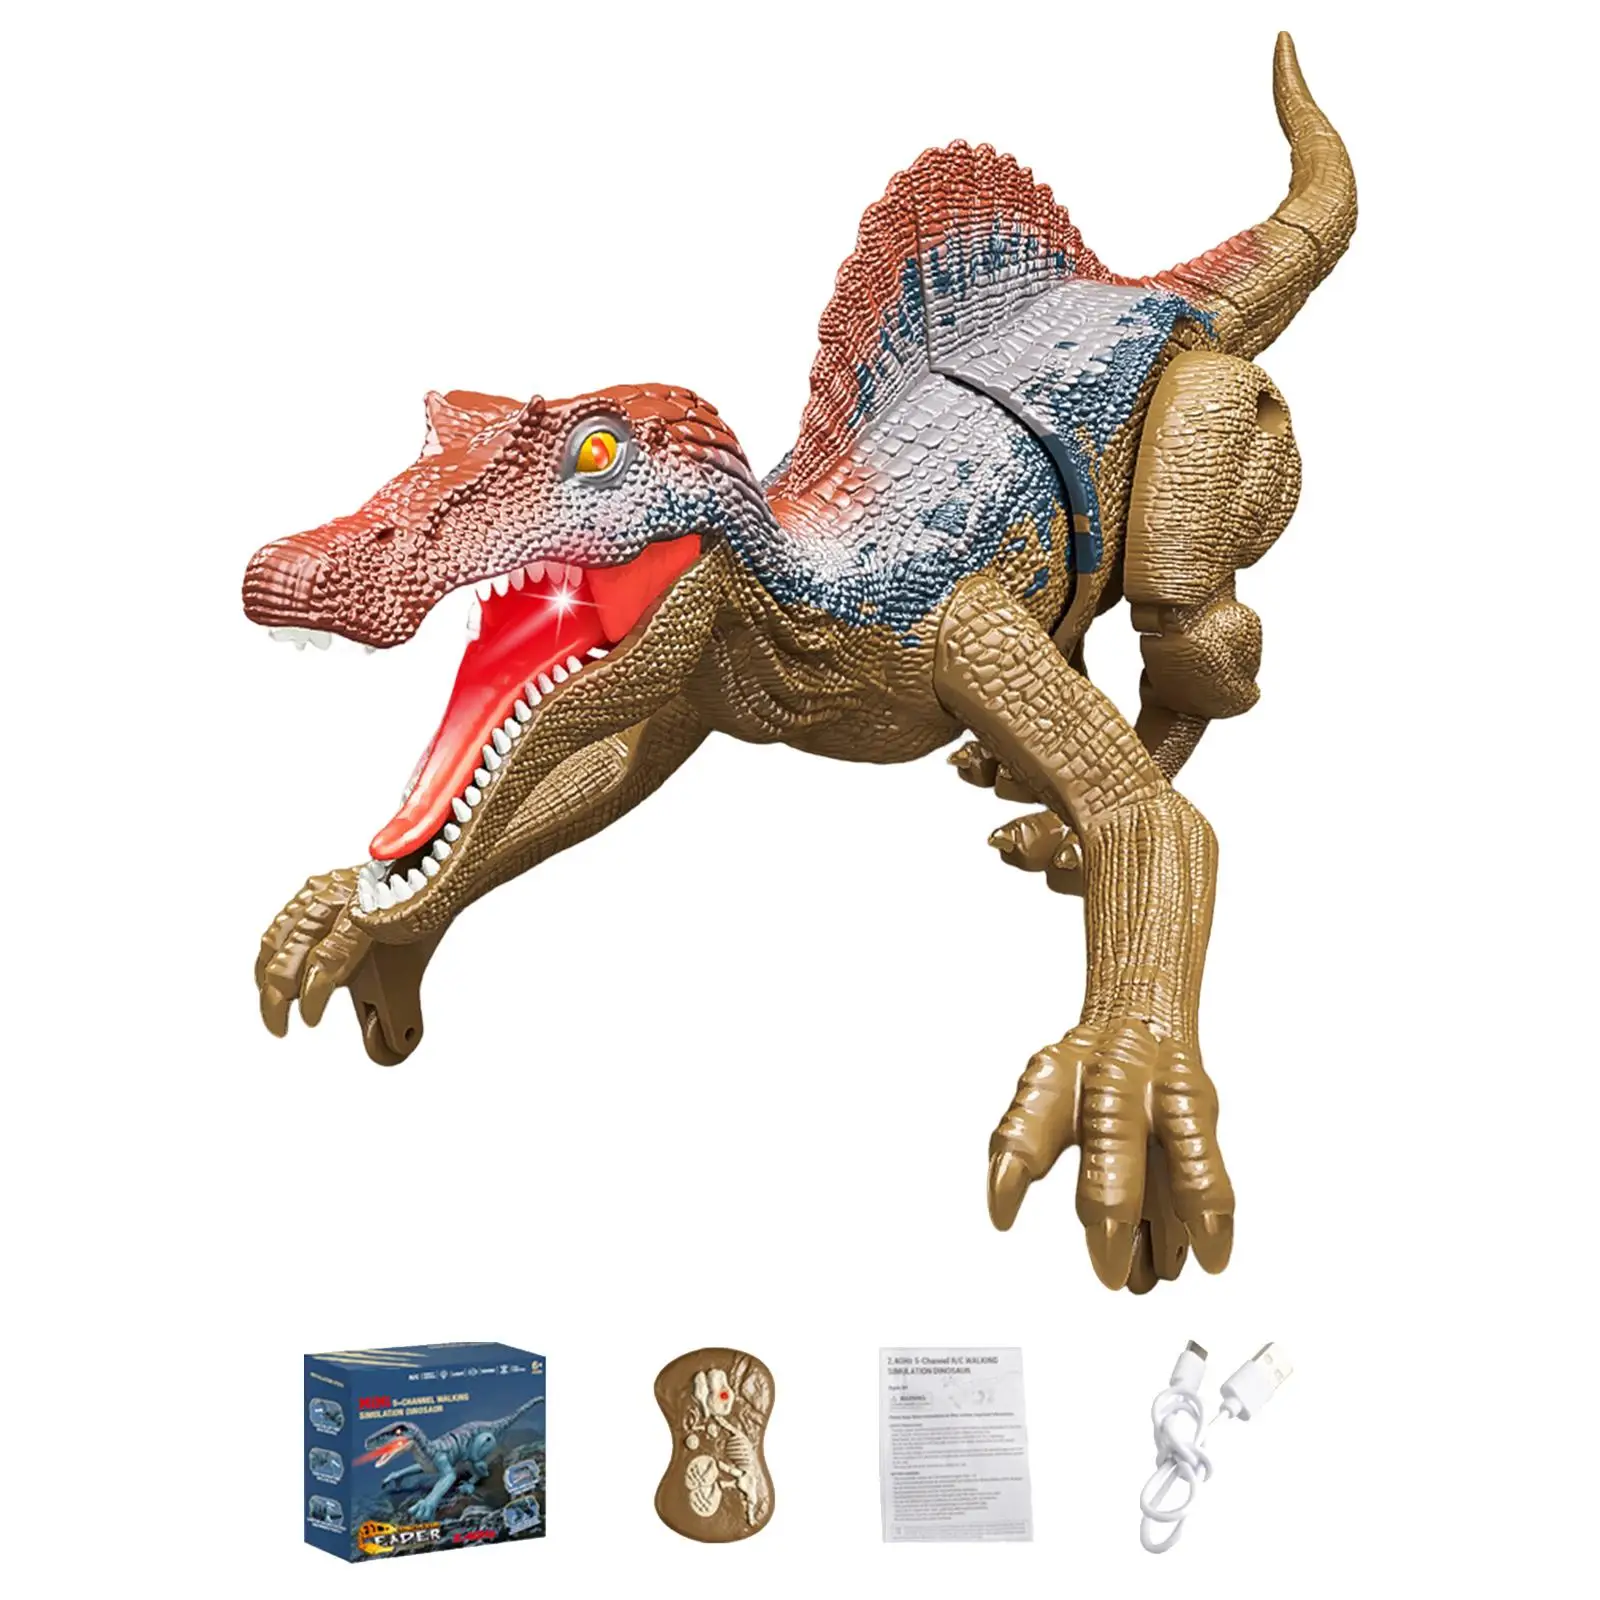 Remote Control Dinosaur Toys with Sound and Light Interactive Toy Children Dinosaur Toys for Children Toddlers Boys Girls Kids